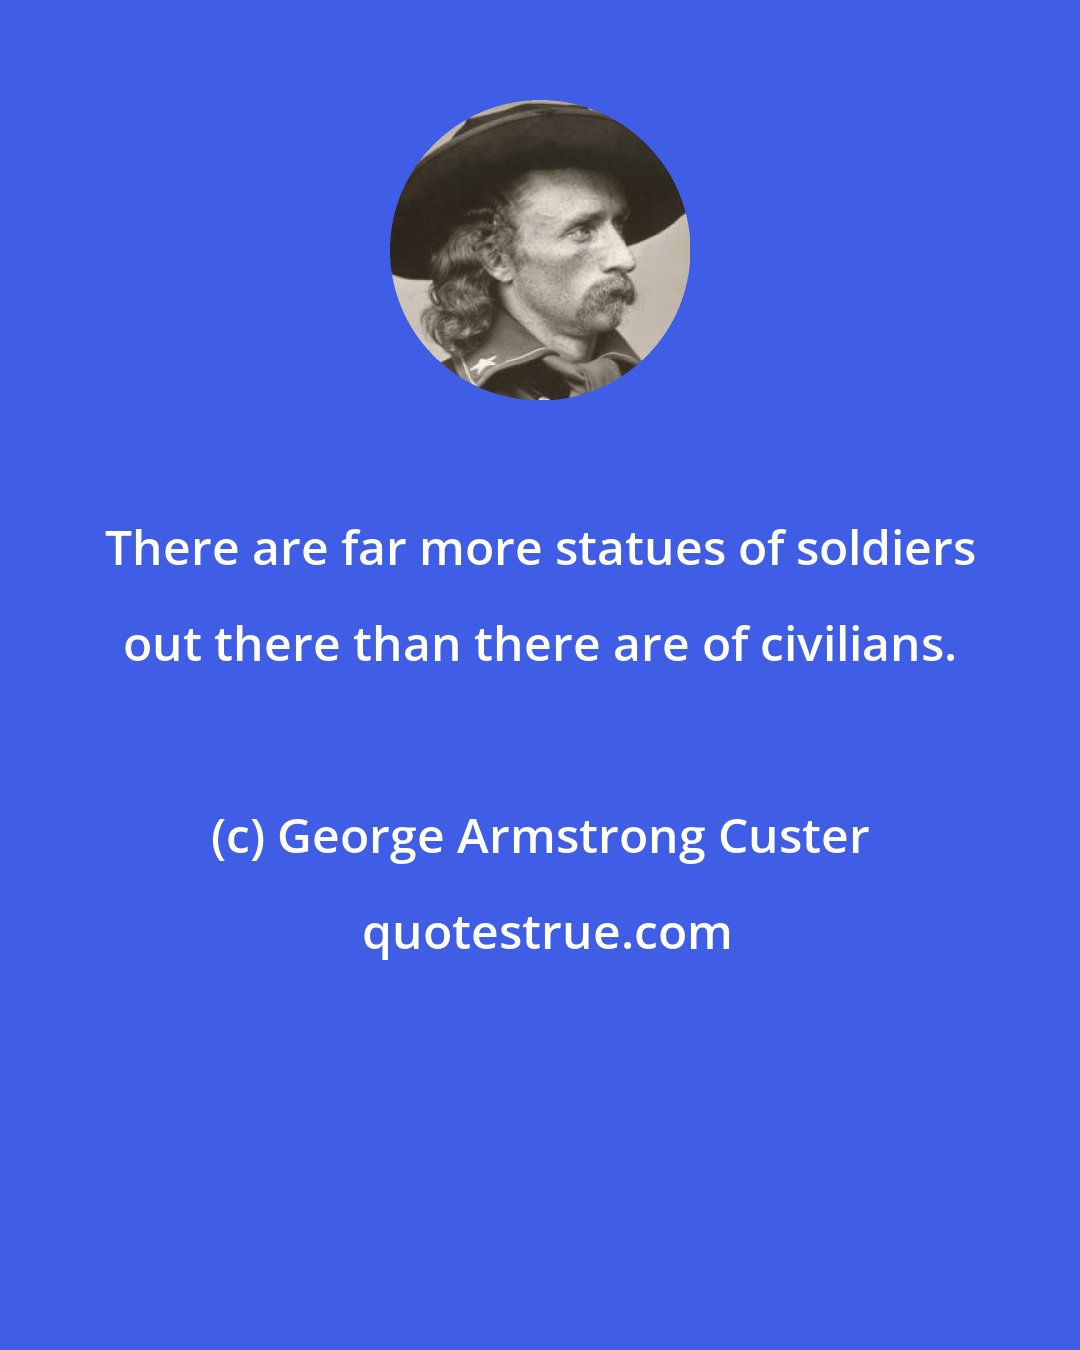 George Armstrong Custer: There are far more statues of soldiers out there than there are of civilians.